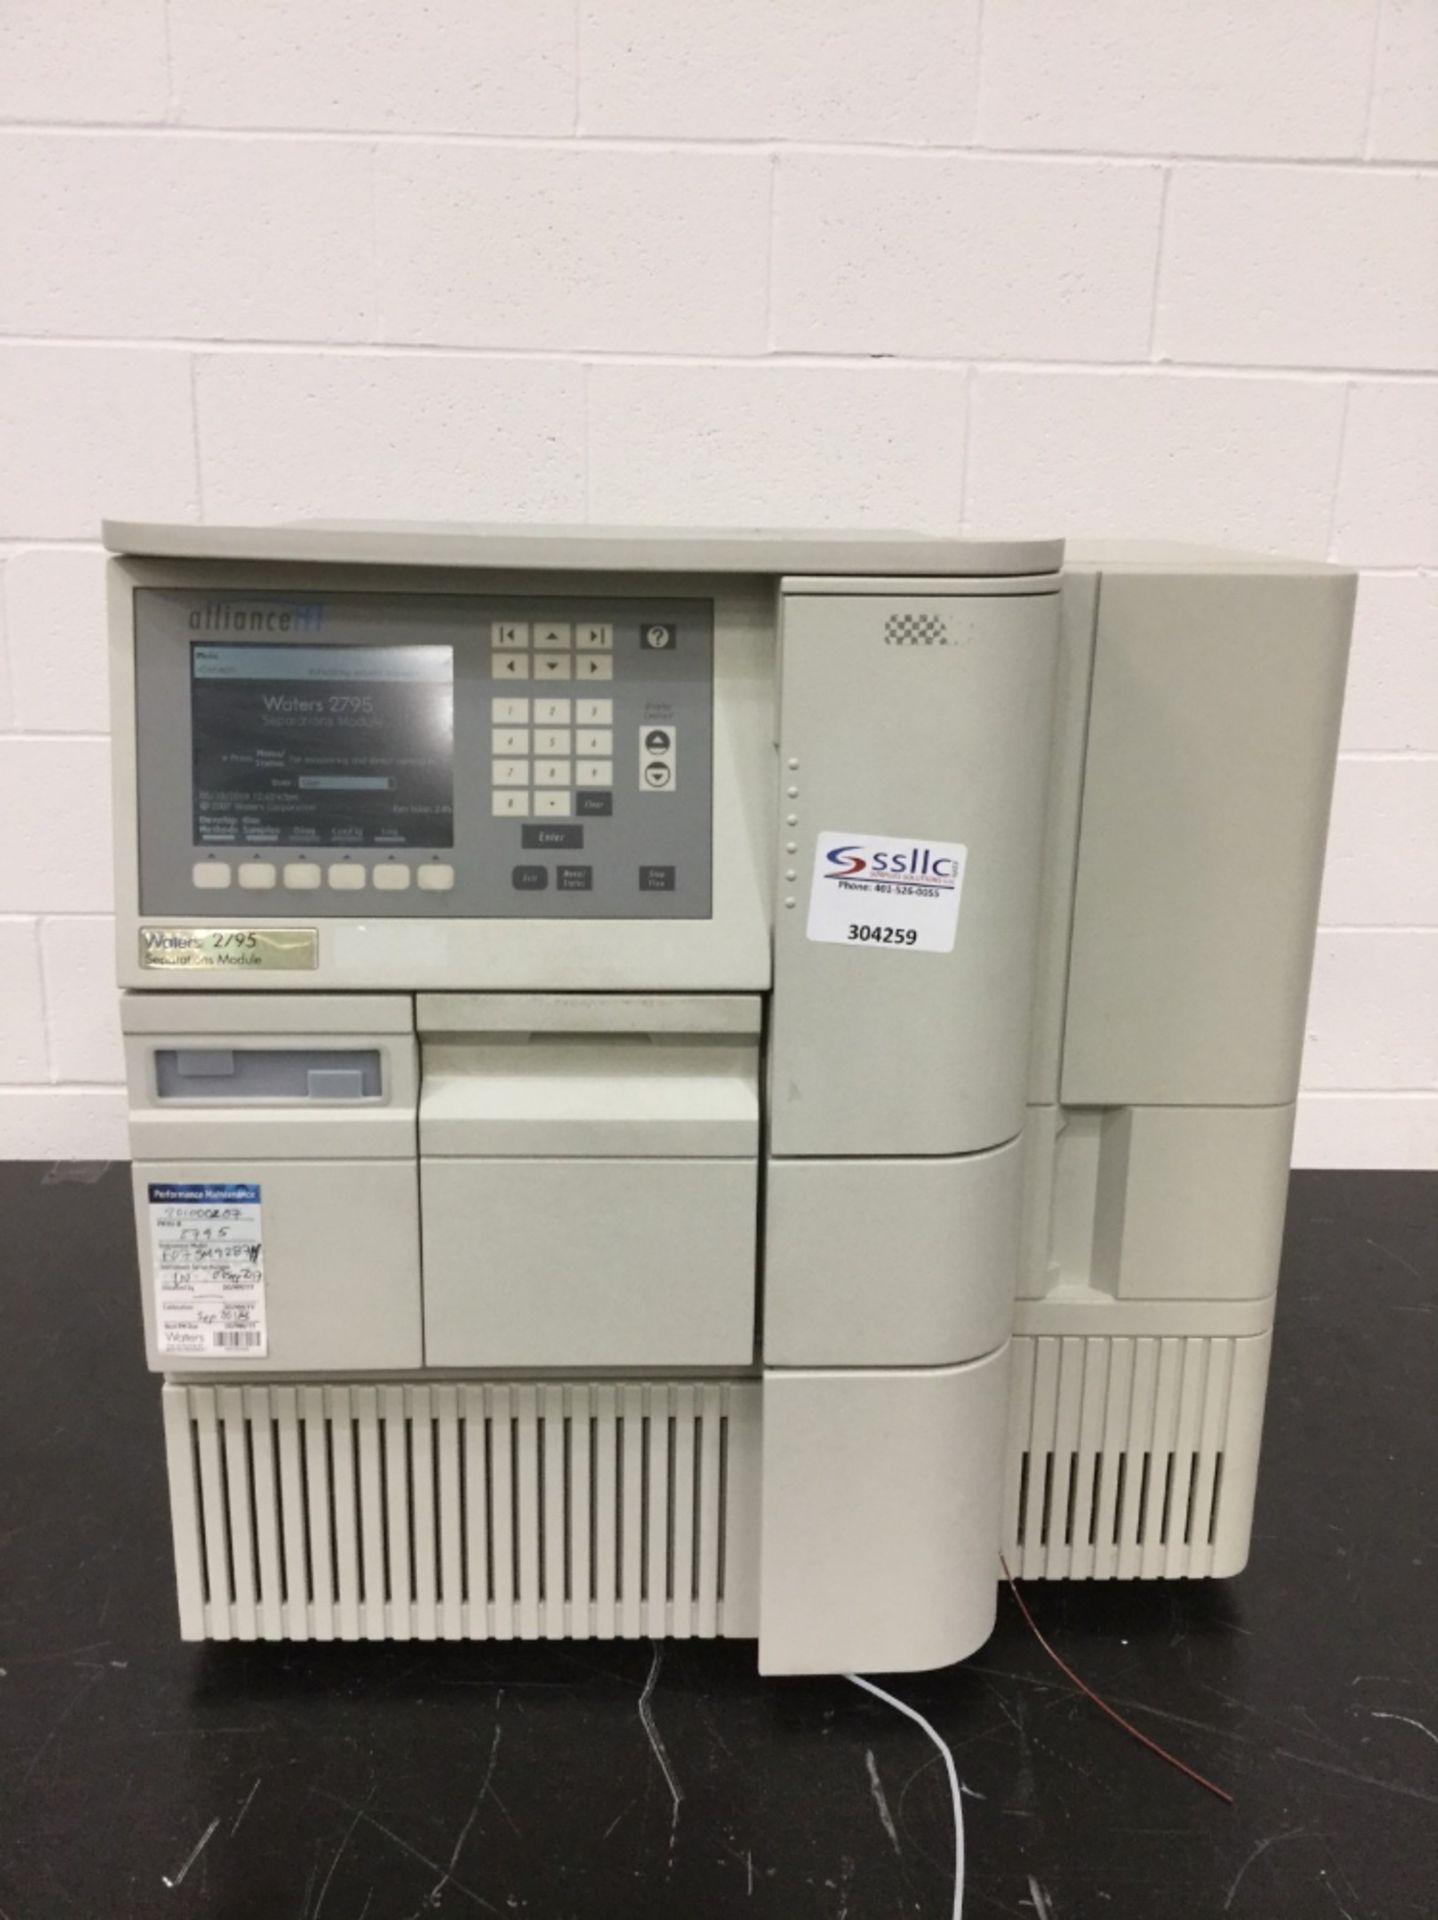 Waters 2795 Alliance HT HPLC System